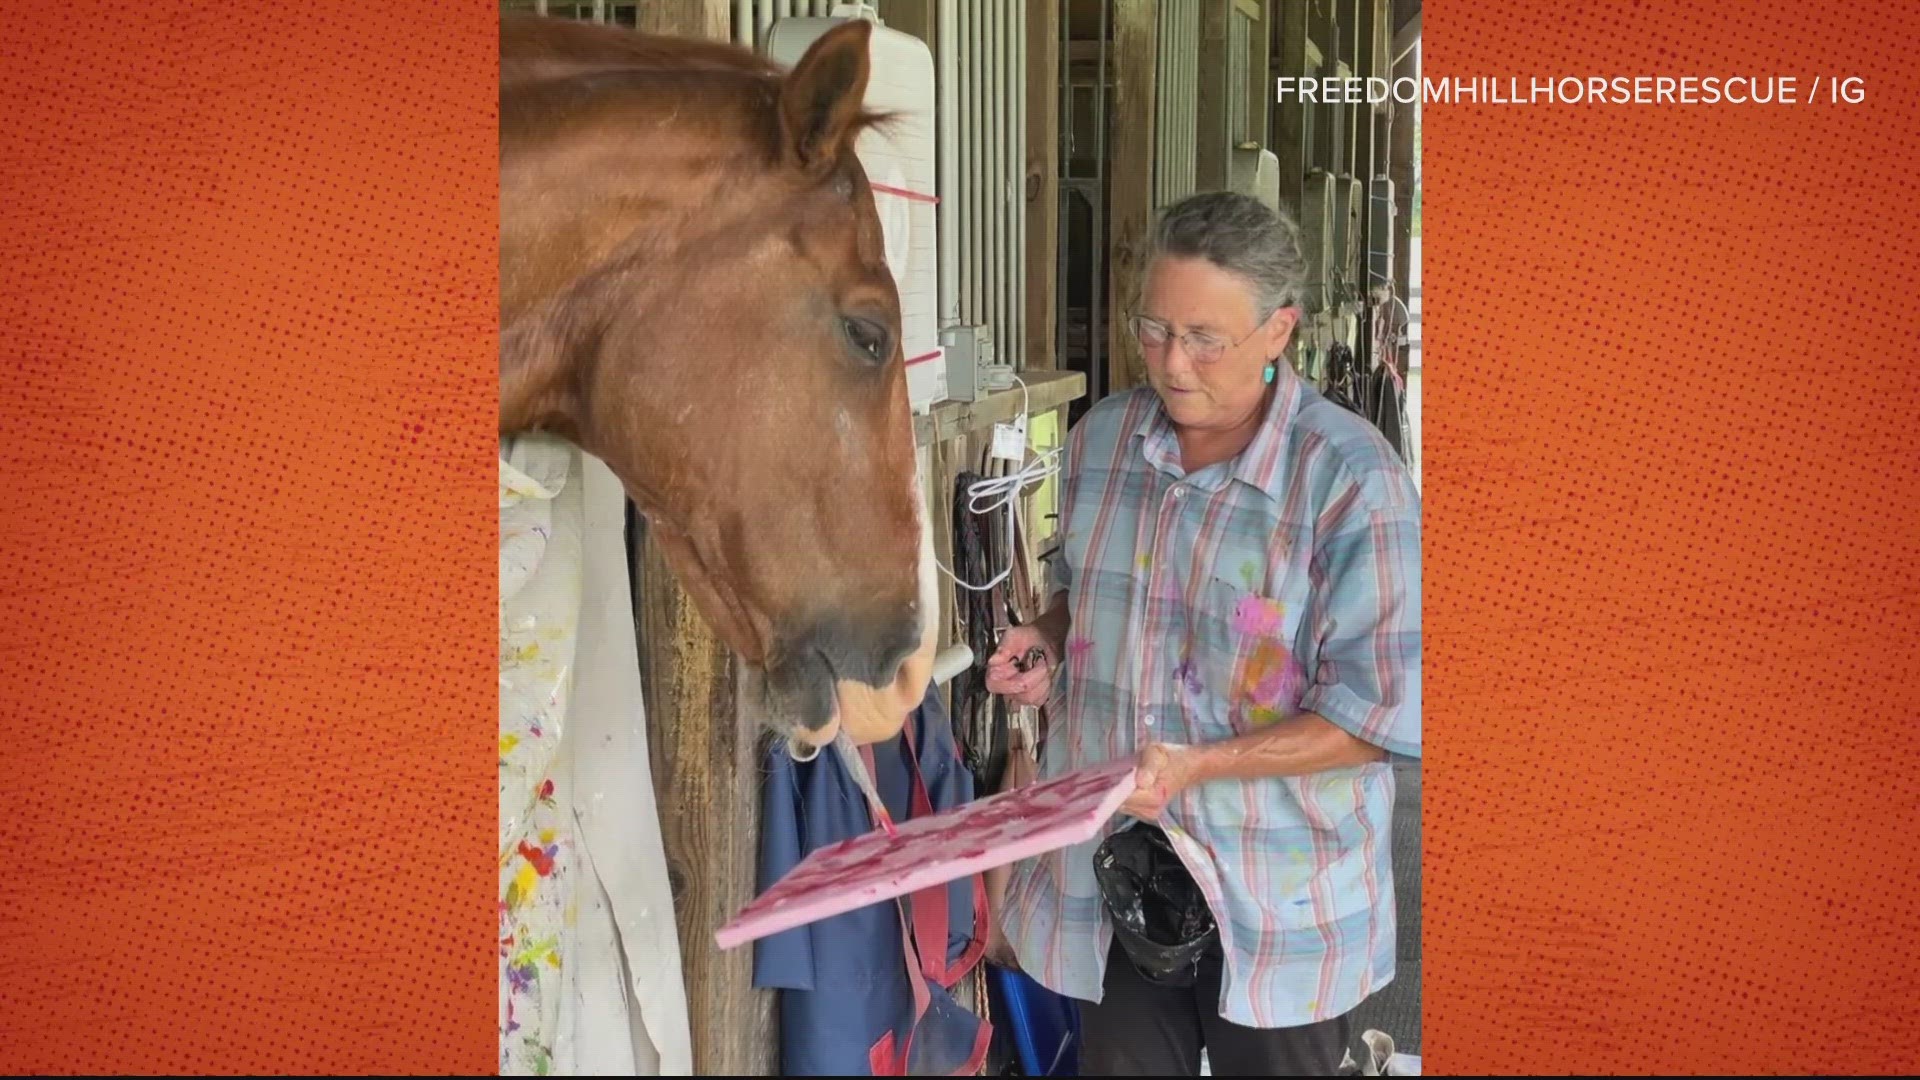 This Calvert County horse has a special talent, and he's using it for good!